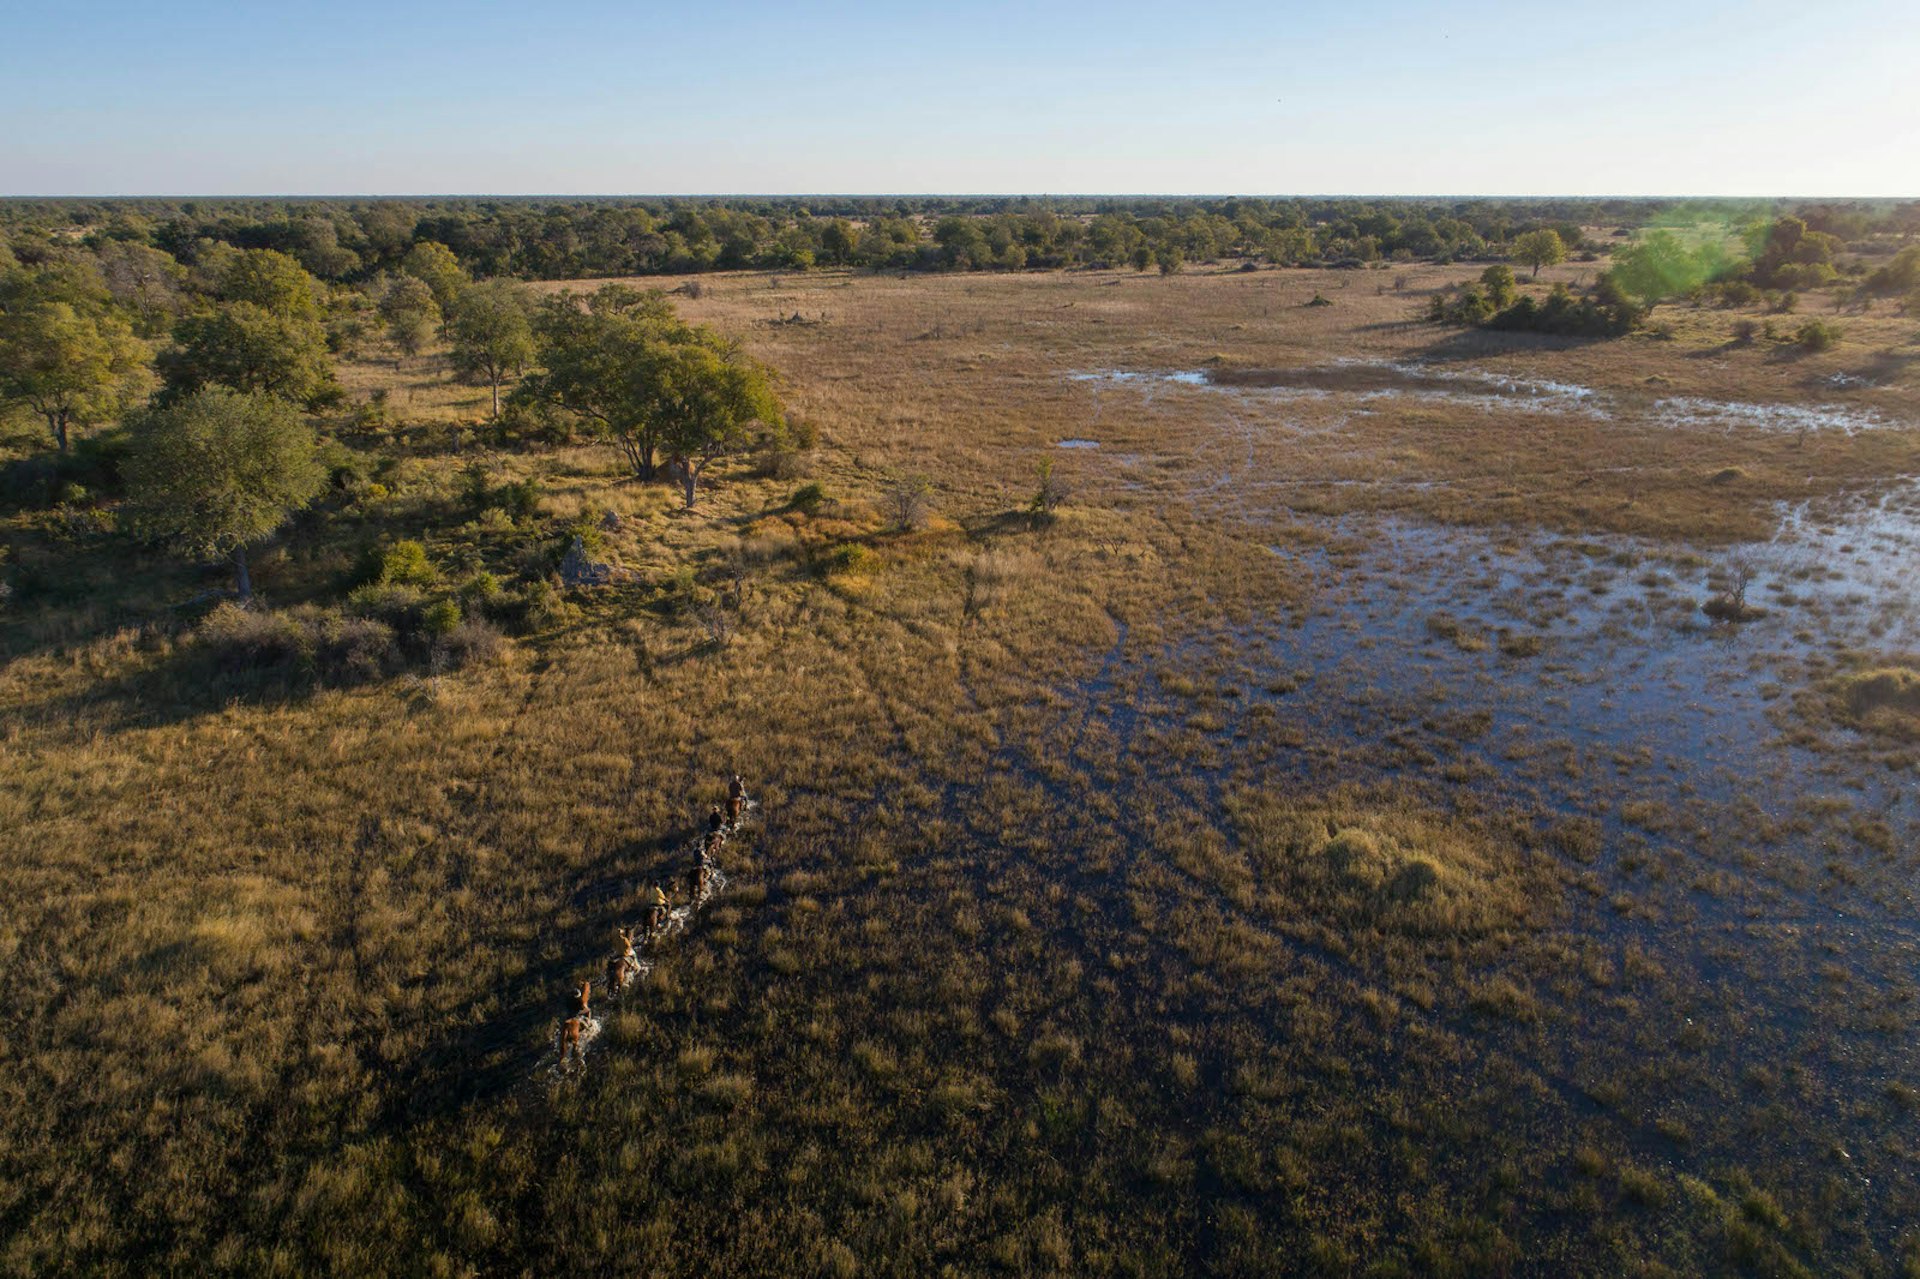 A group of people on horseback work their way through the flooded open grasslands of the Okavango Delta in single file © James Gifford / Lonely Planet